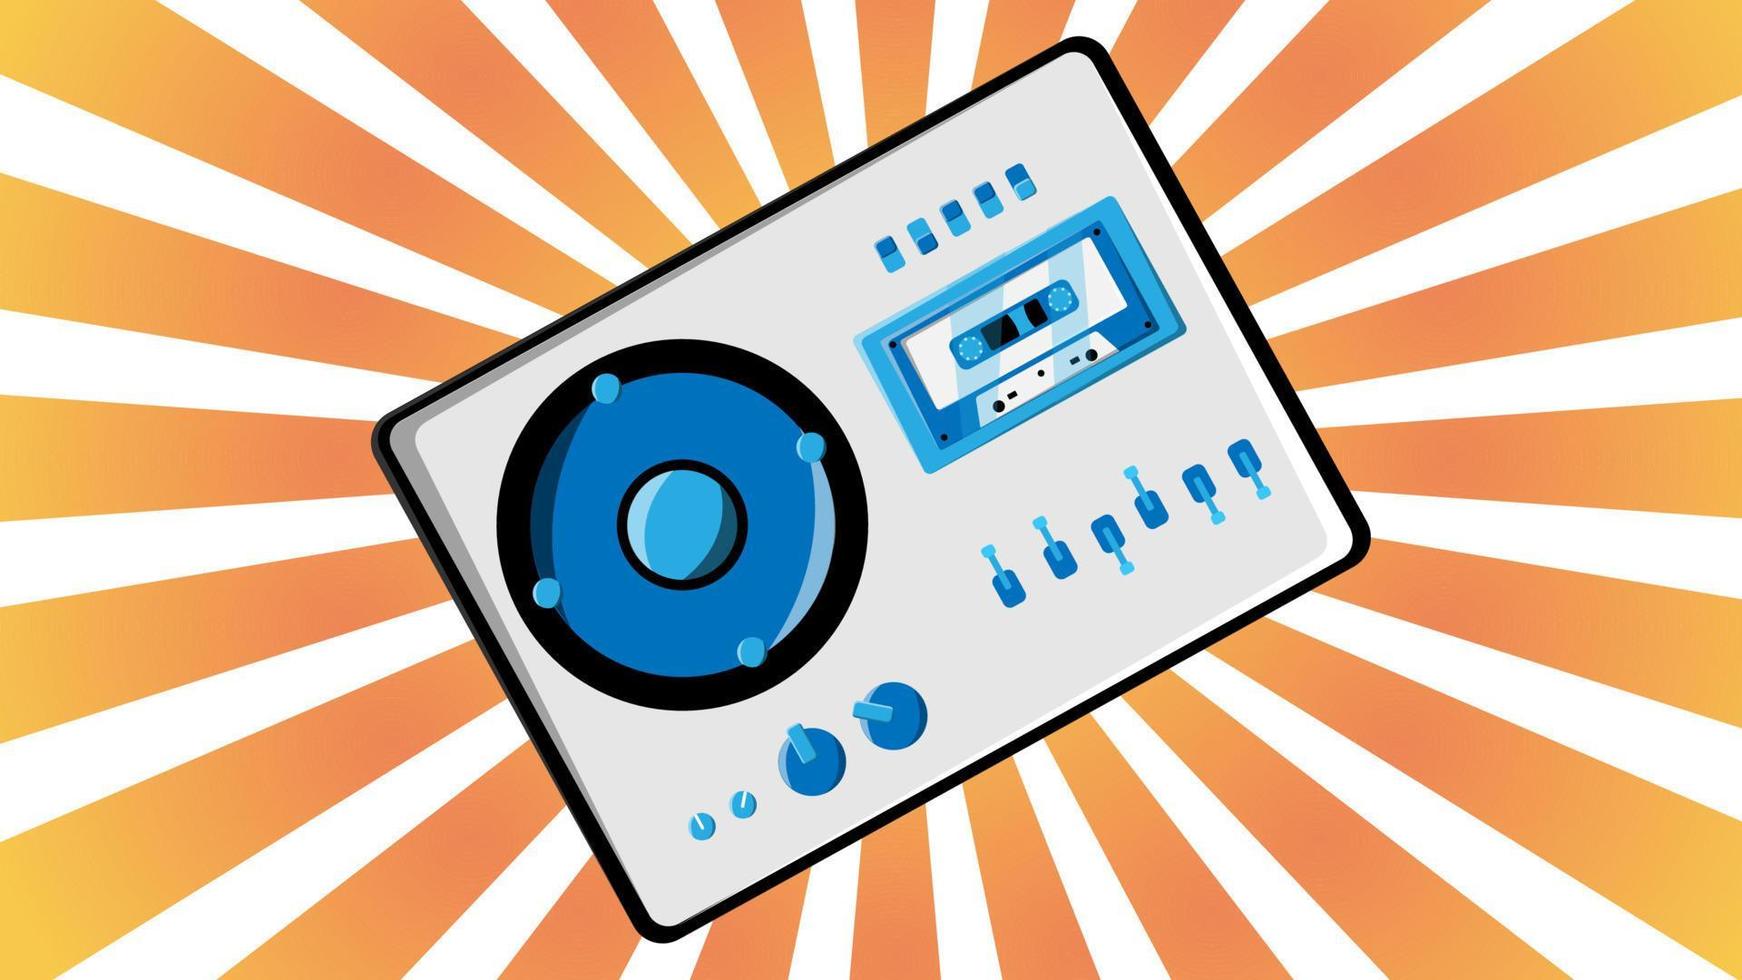 Old retro vintage music cassette tape recorder with magnetic tape babbin on reels and speakers from the 70s, 80s, 90s against the background of the orange rays of the sun. Vector illustration